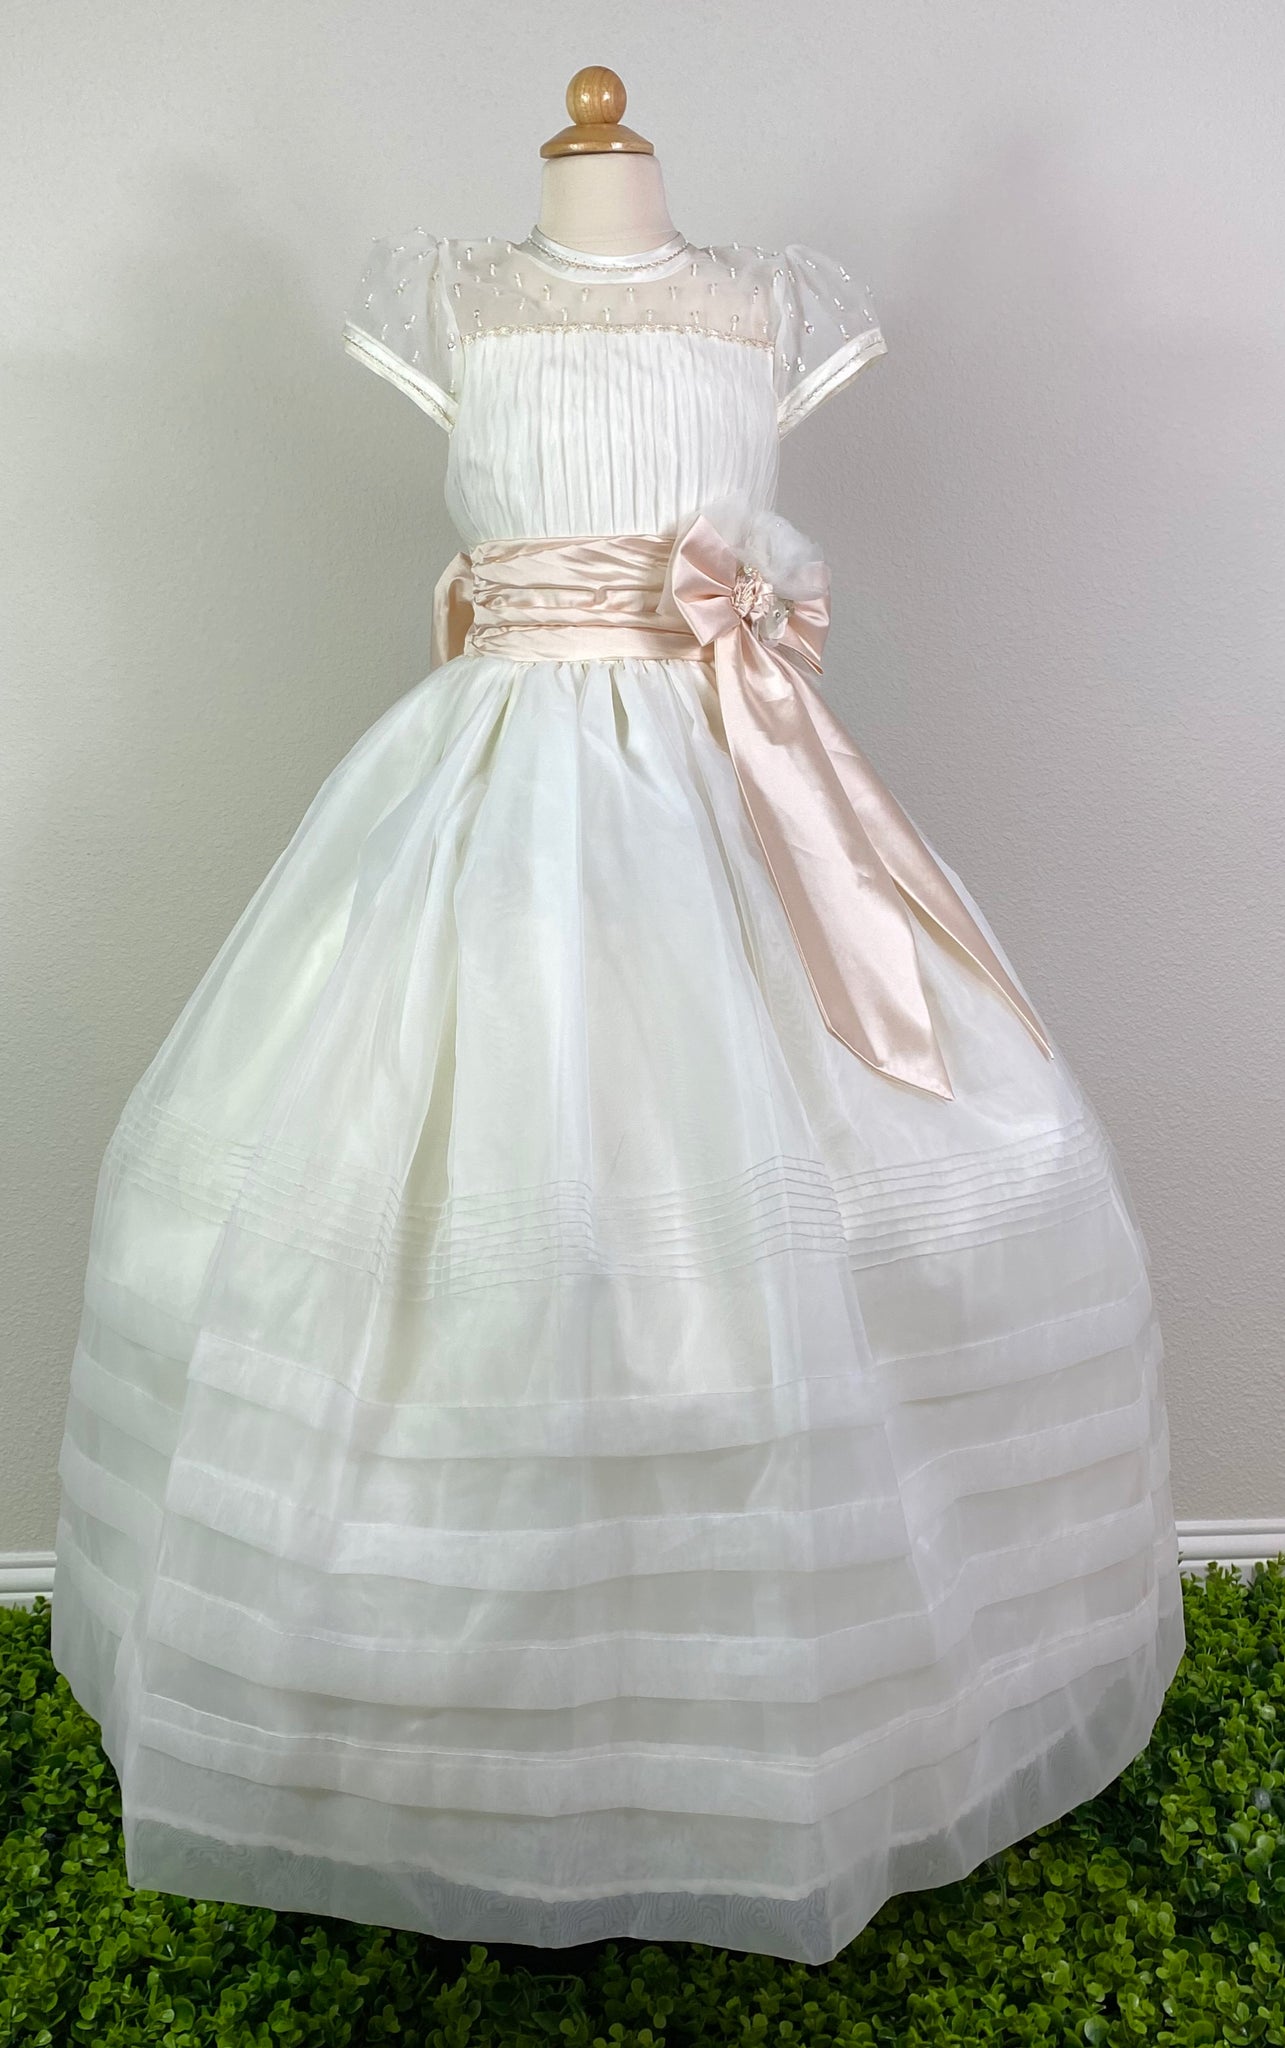 Ivory, size 10 Hand-stitched edging along sleeves and neckline Mesh and satin illusion bodice with beaded detailing and pleats Peach ruched cummerbund Large satin bow on front with floral detailing in center Meshed skirt with braided stripes along bottom Satin covered button closure Peach ribboning for large bow in back